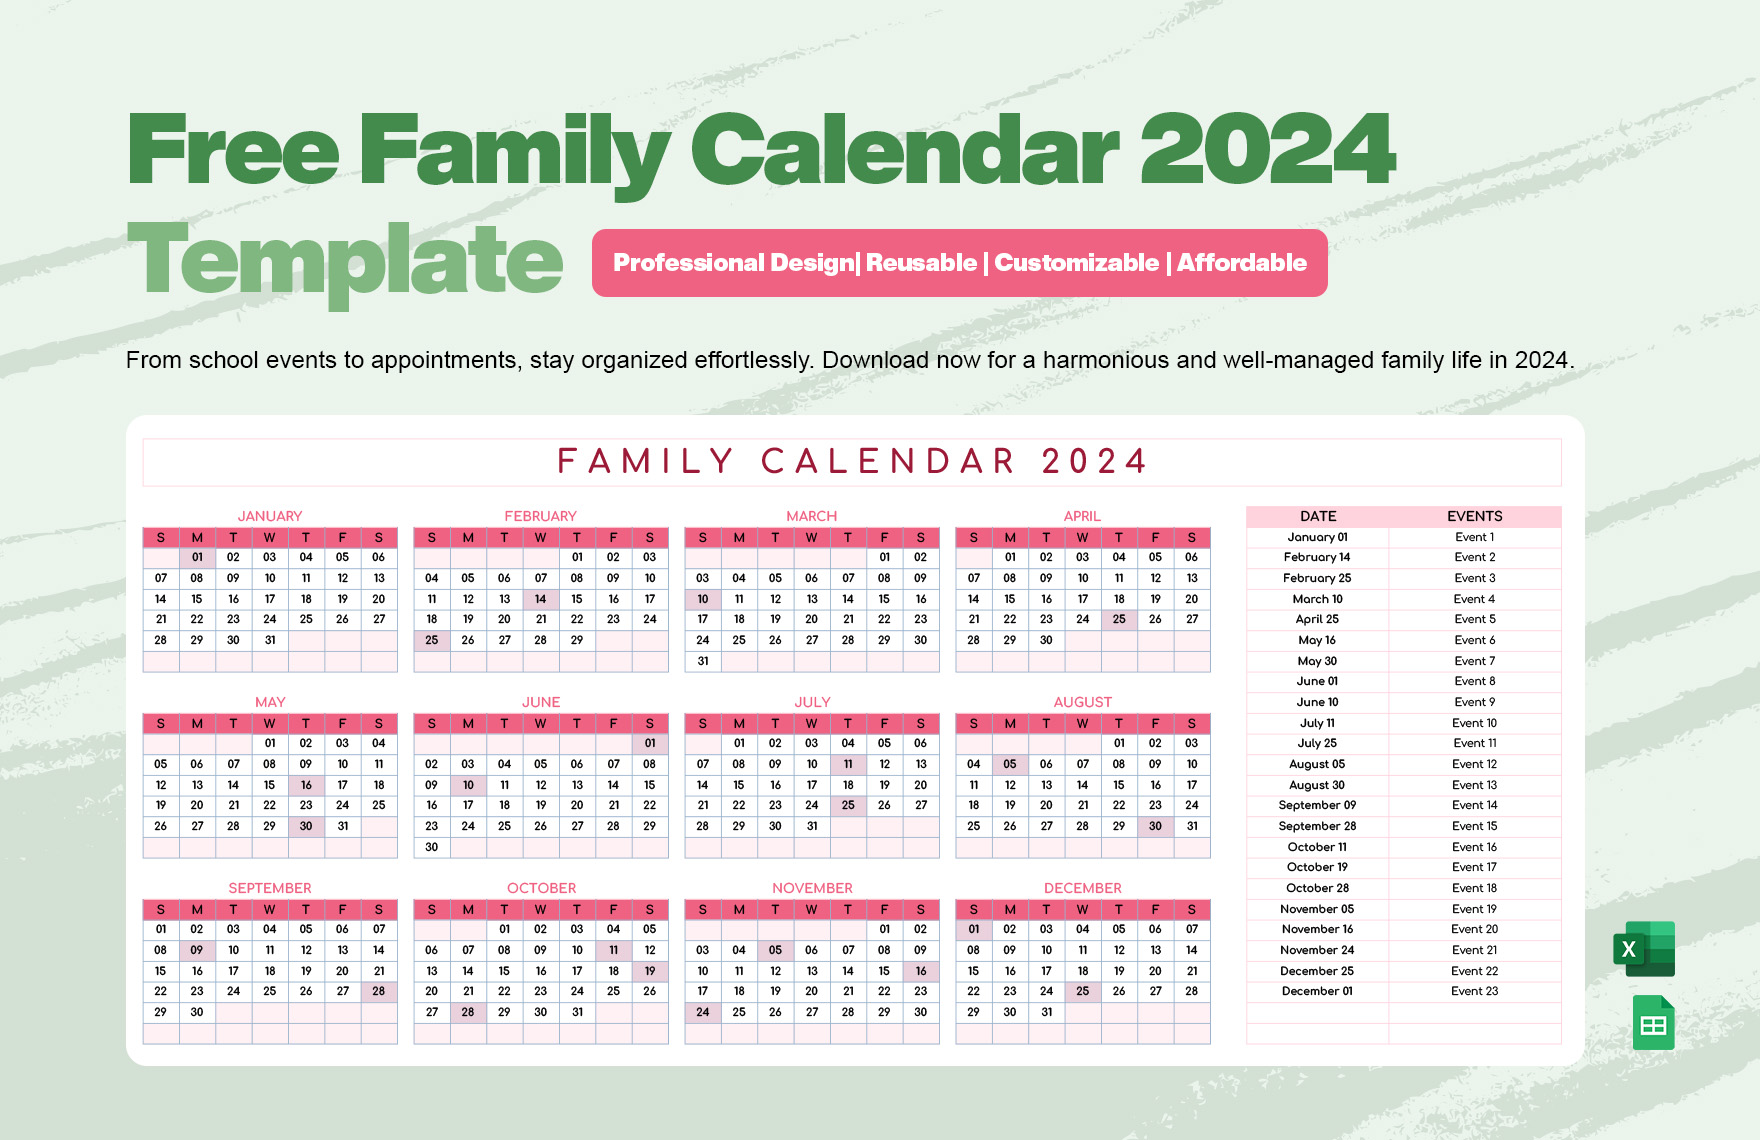 free-family-calendar-2024-template-download-in-excel-google-sheets